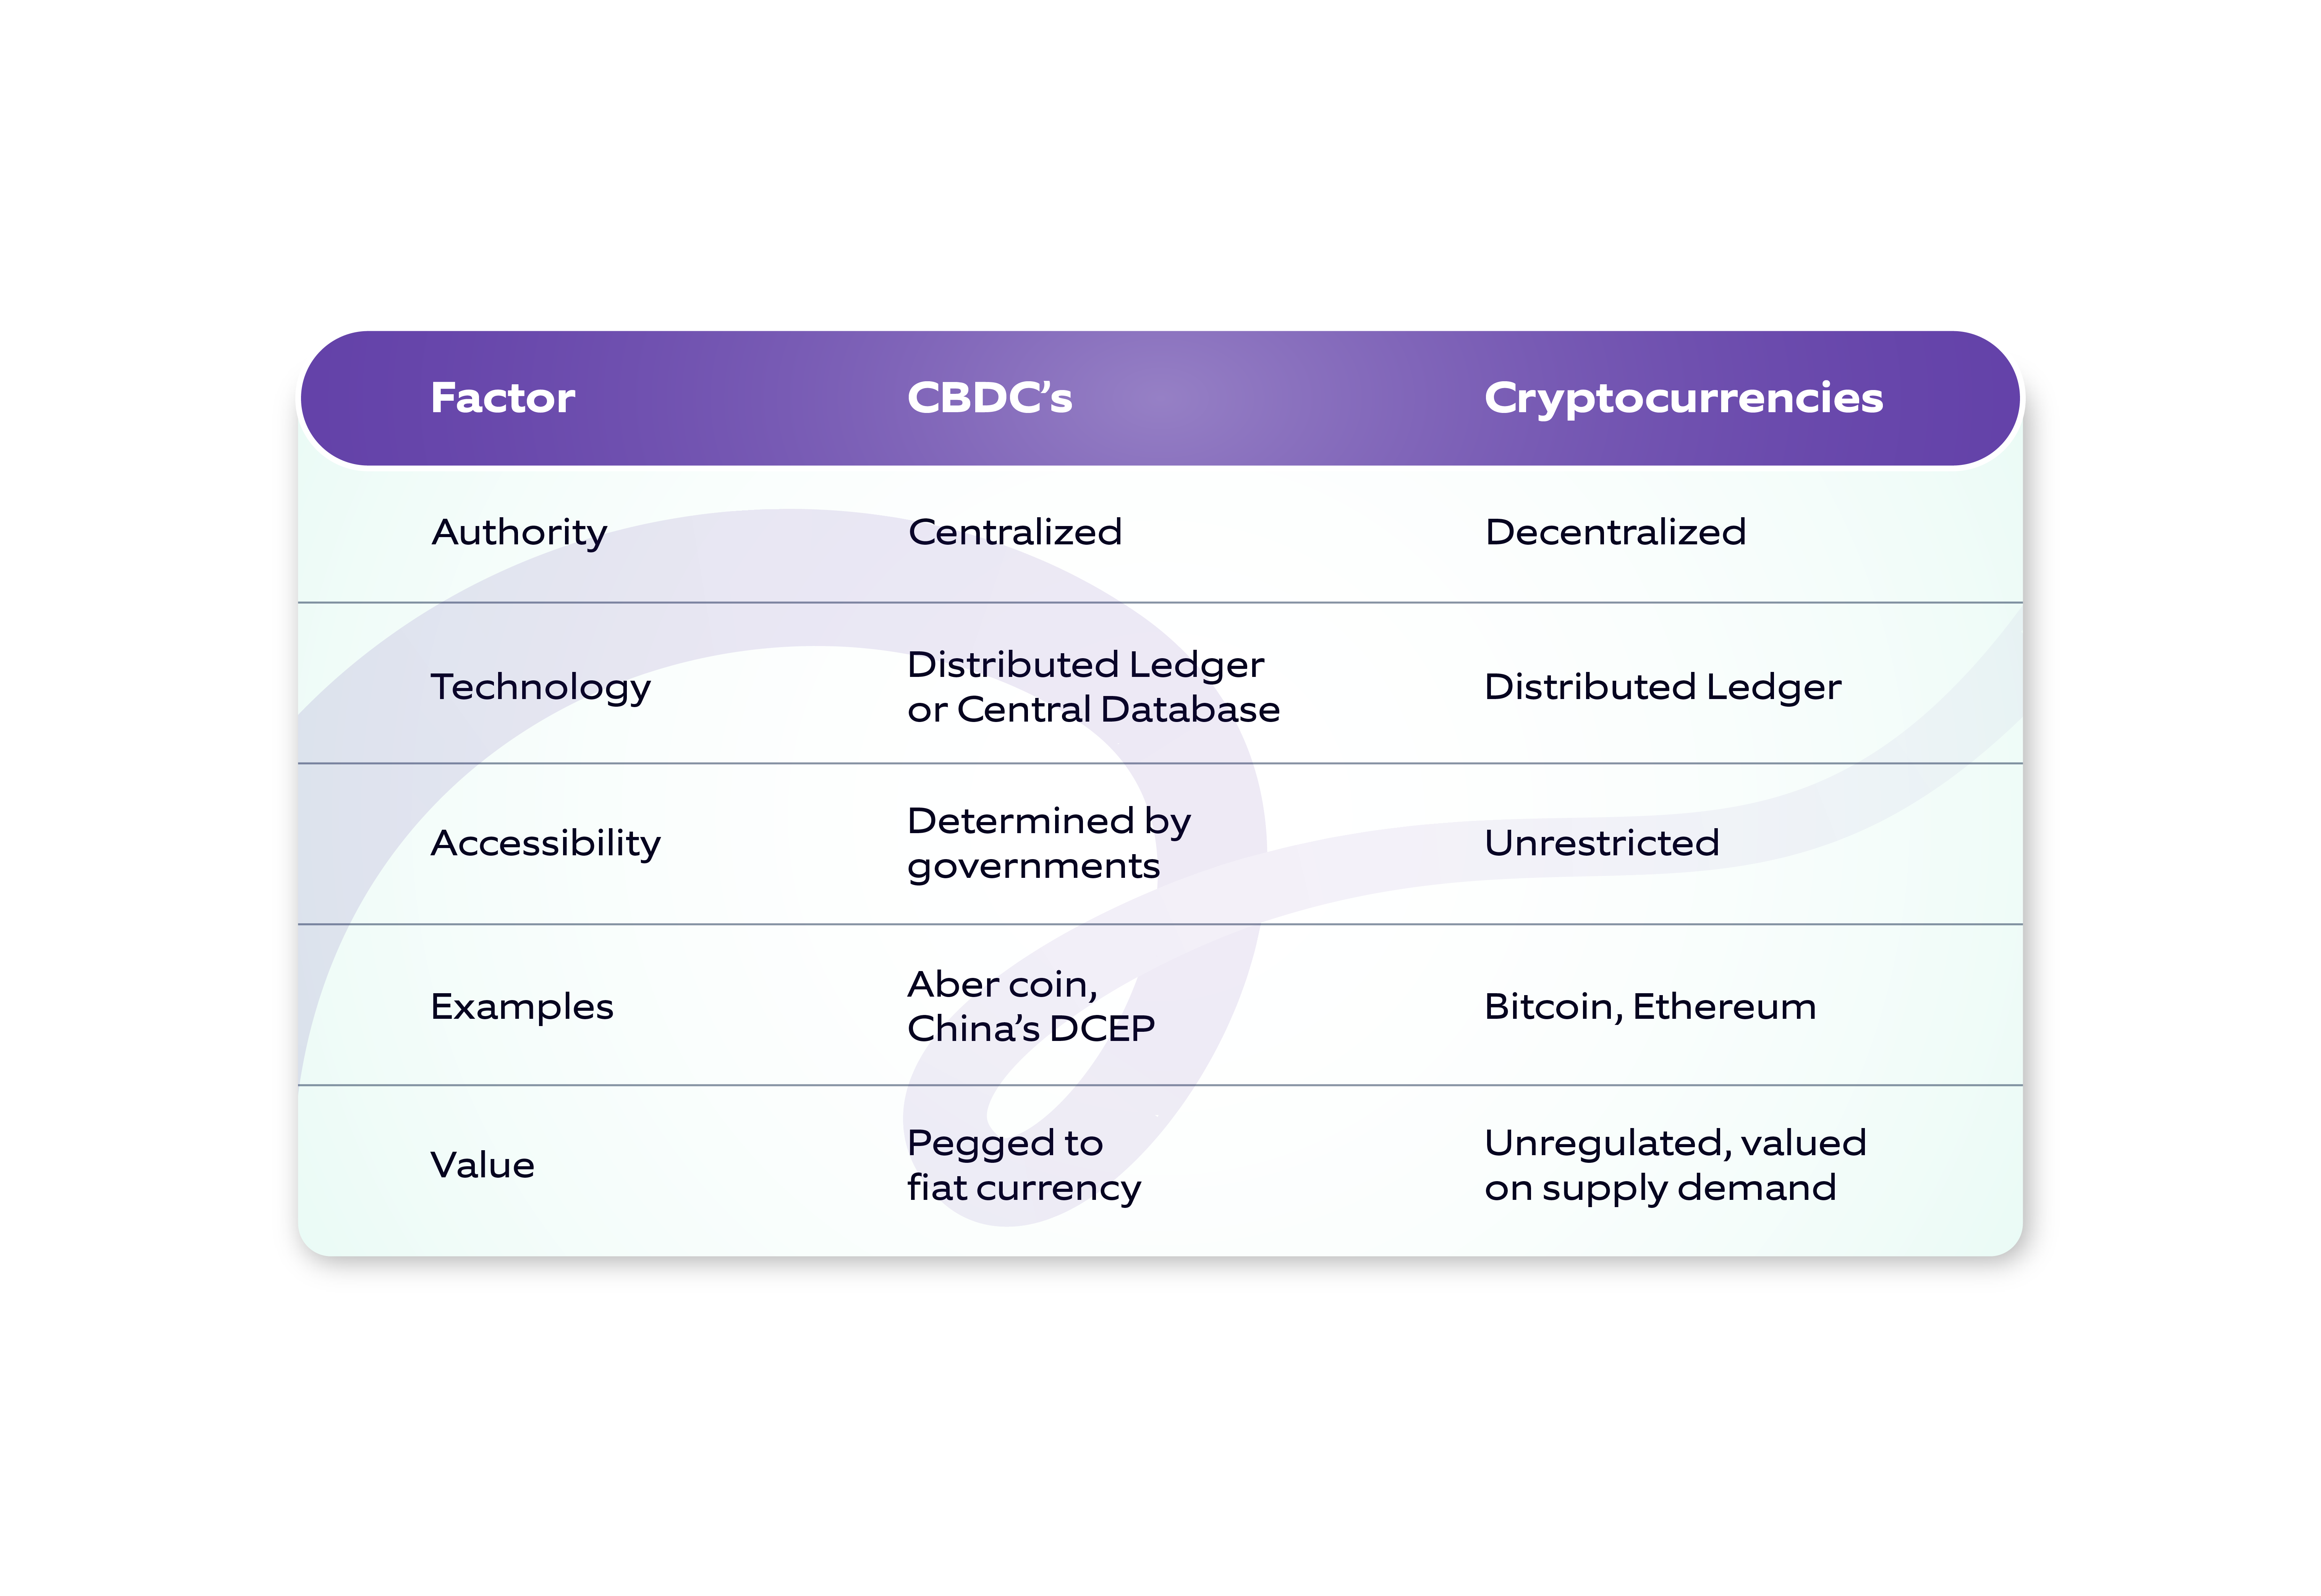 A table mentioning the difference between CBDC and Cryptocurrencies under different parameters